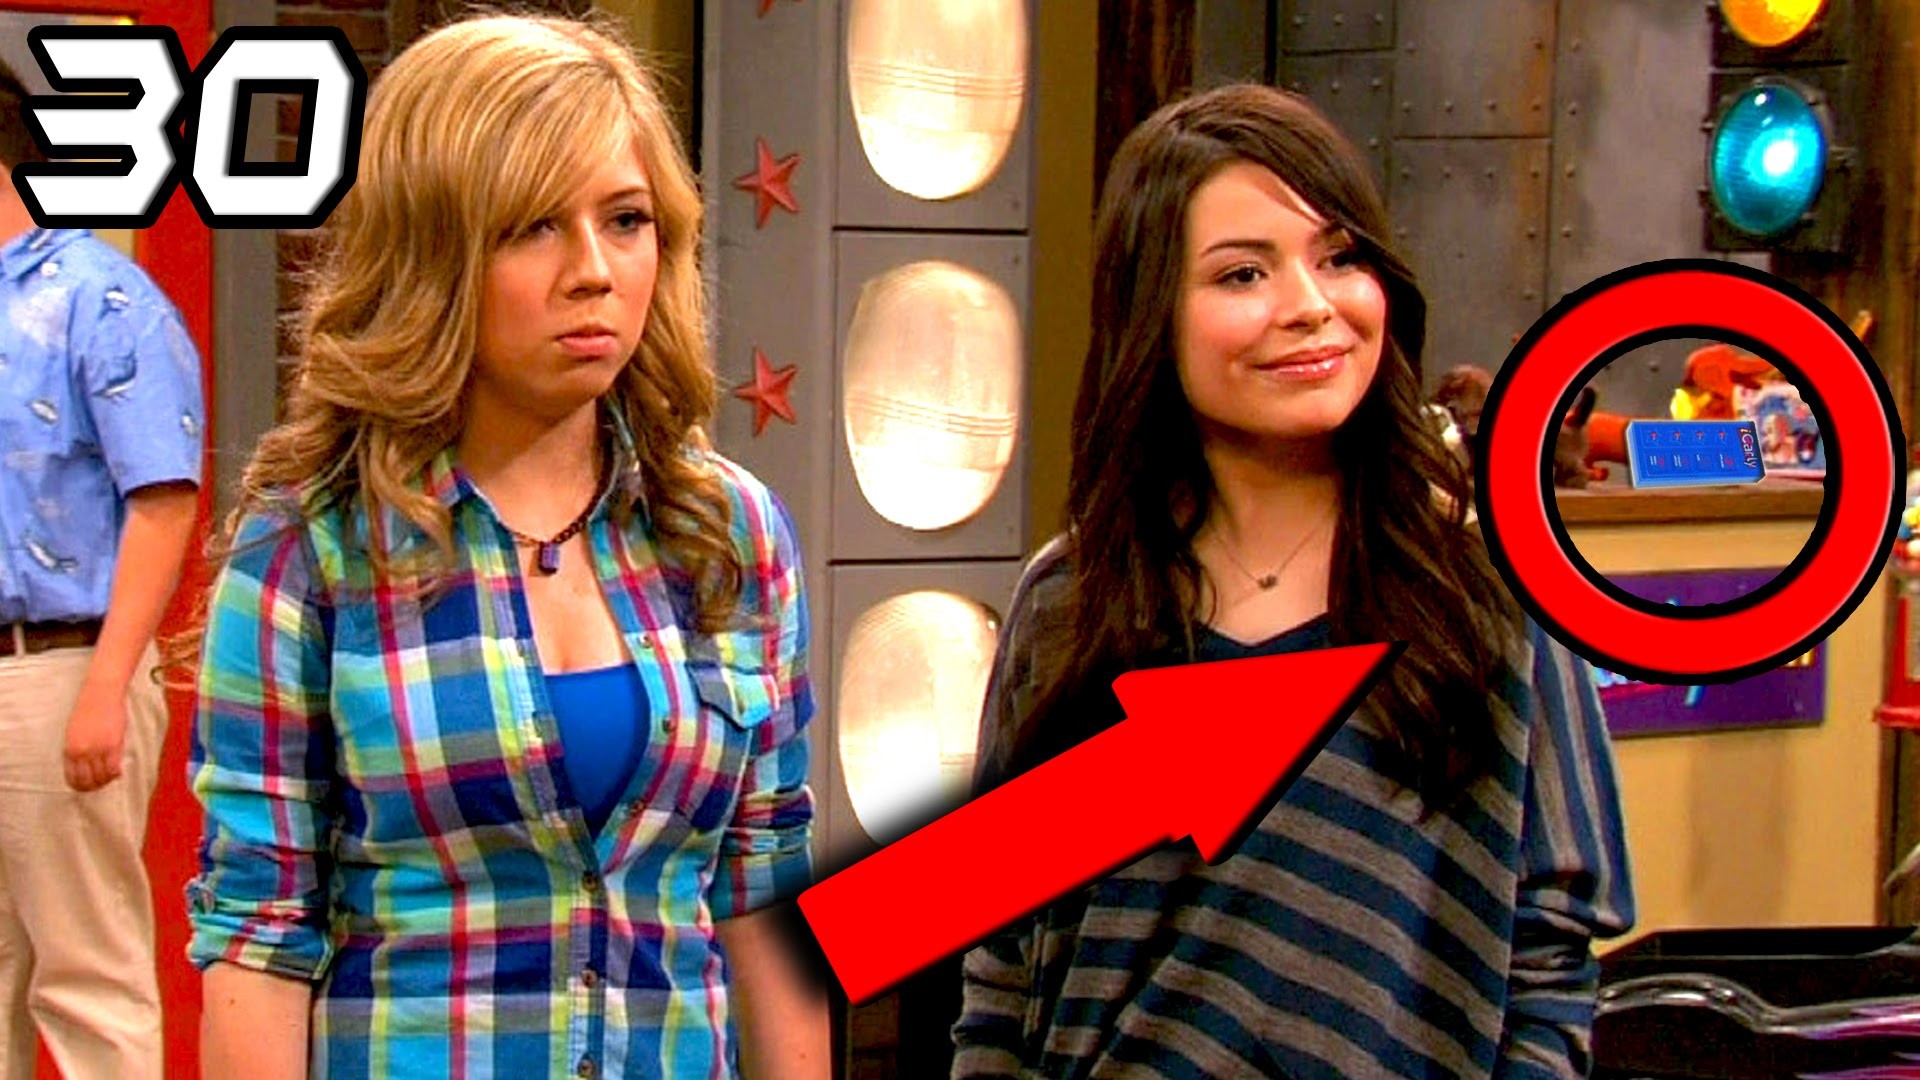 1920x1080 30 Things You Probably Didn't Know About "iCarly"